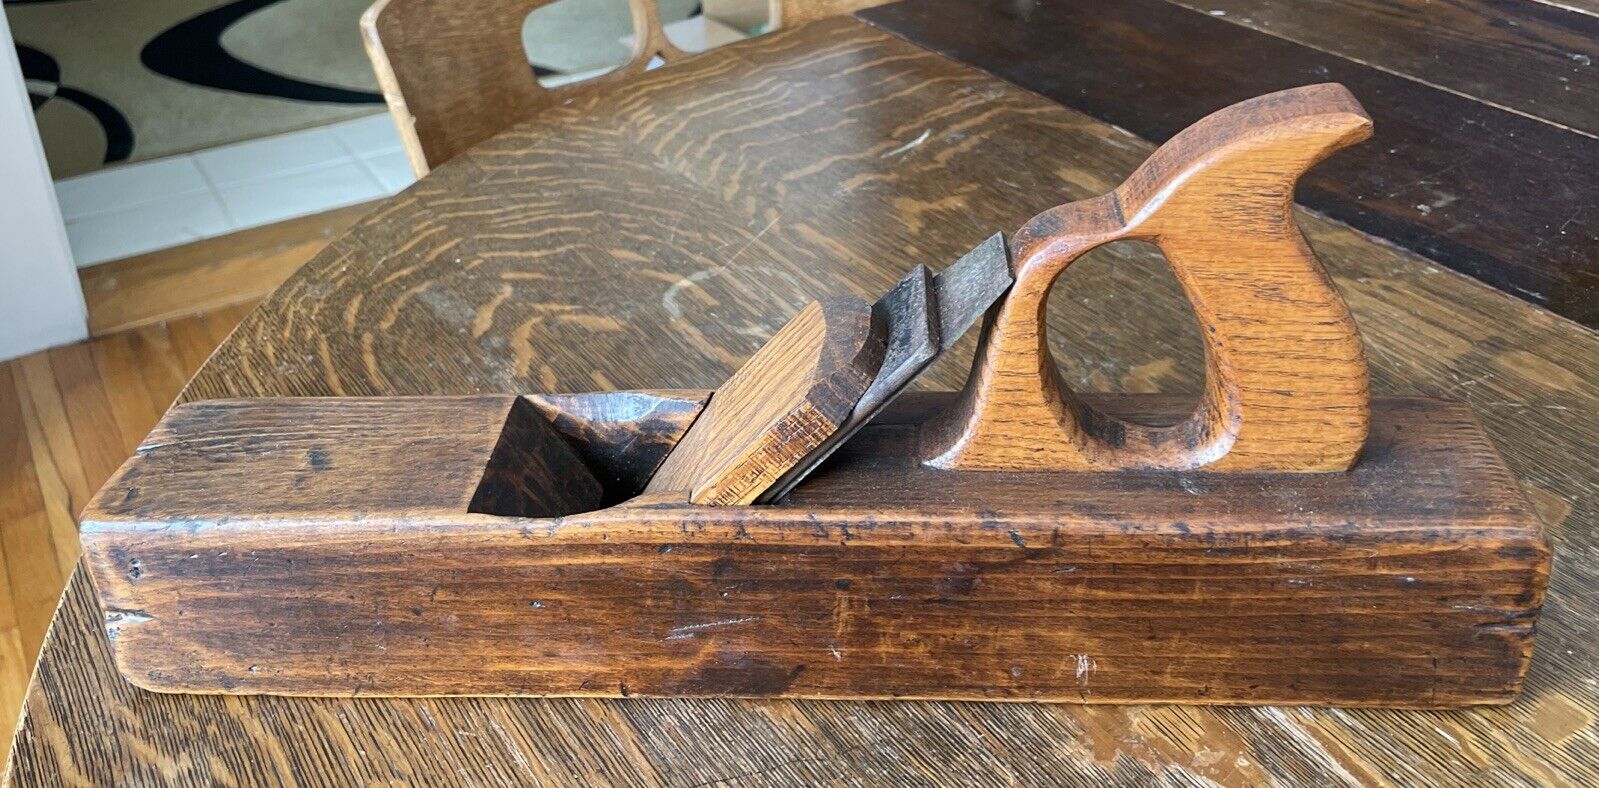 Antique wooden jointer plane made by Stanley. 16” Long, 2 1/2” Wide, 7” High